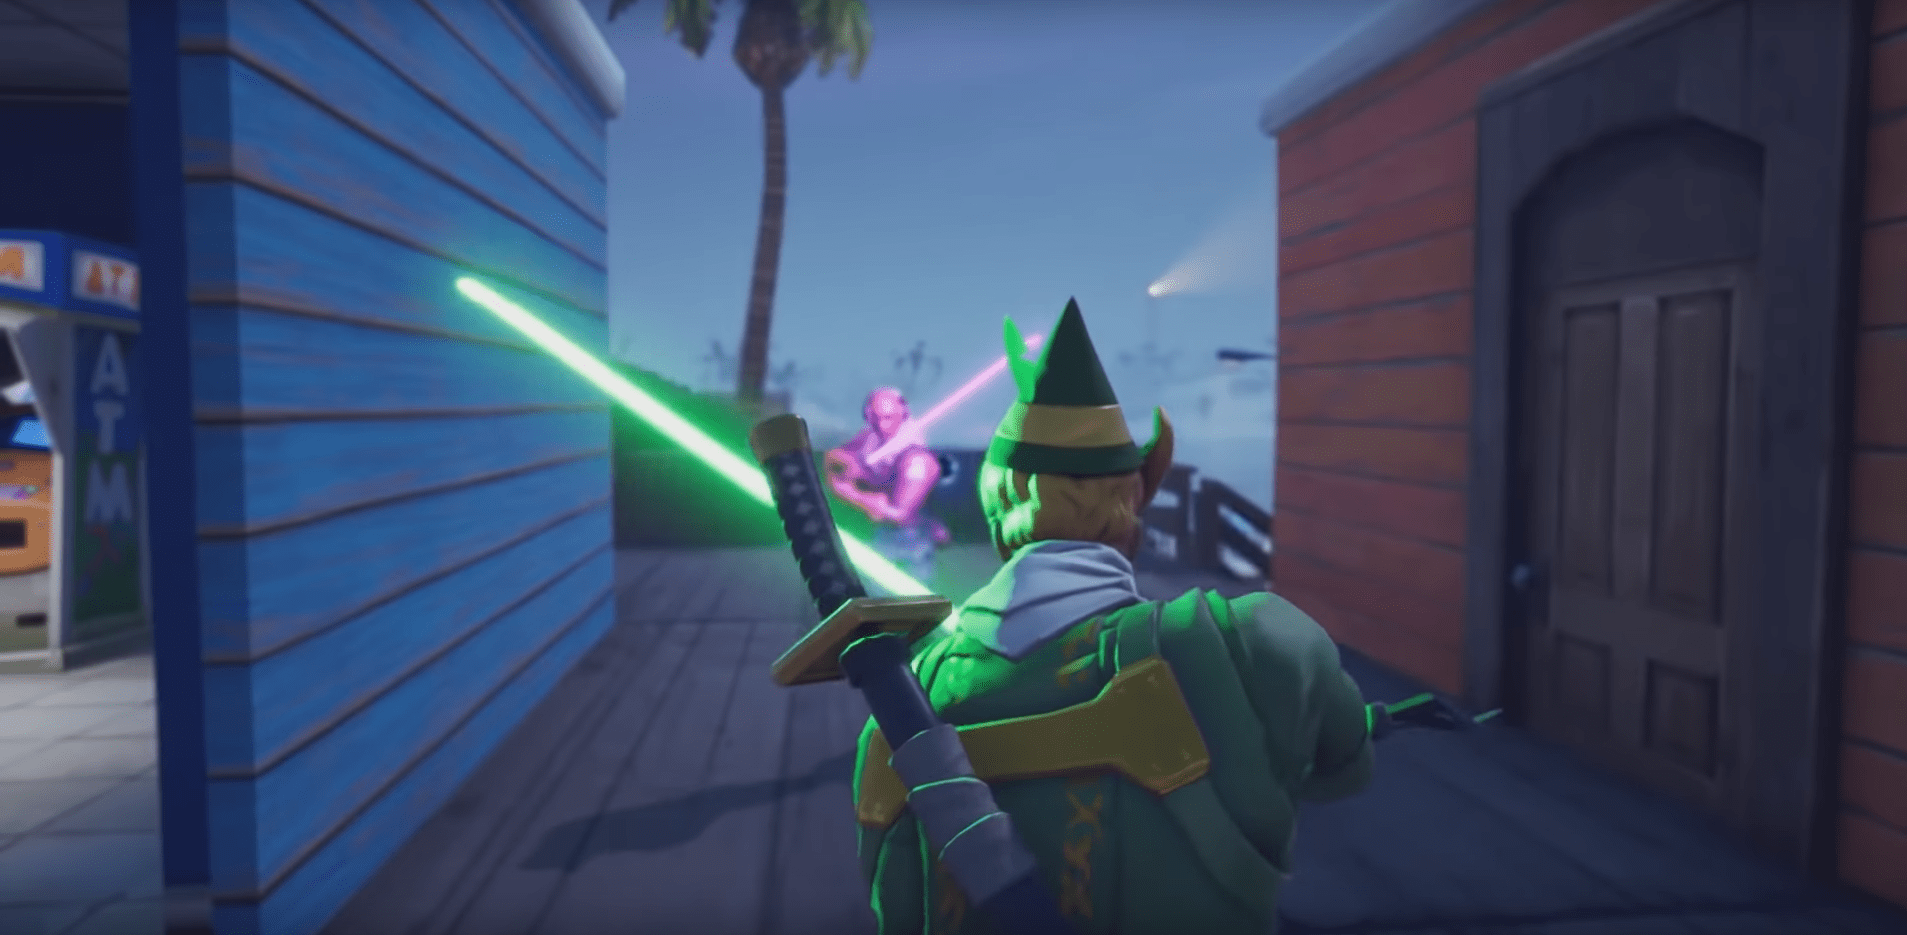 Lightsabers Will Be Leaving Fortnite Soon Which Some Players Are